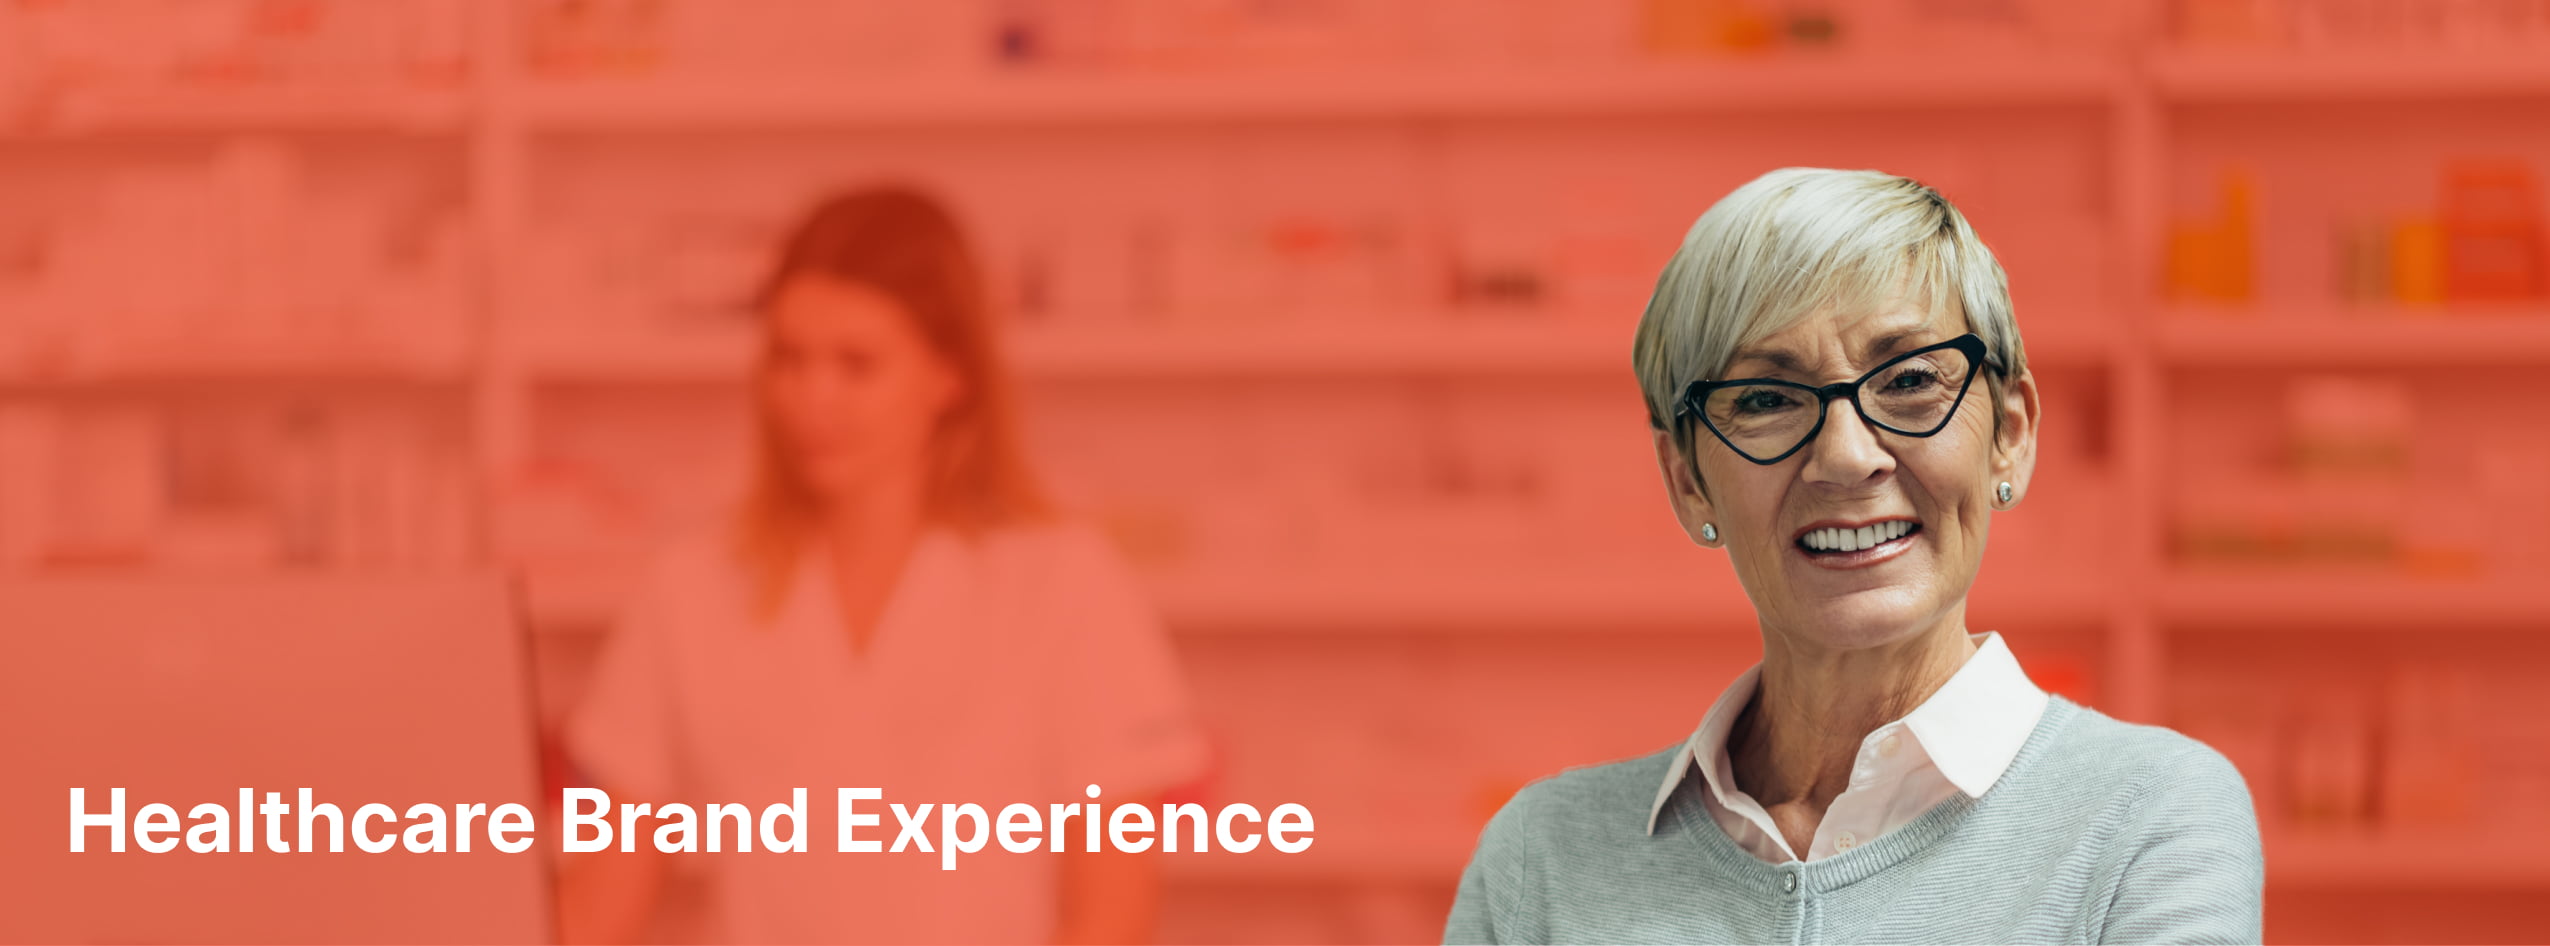 happy woman at pharmacy displaying positive healthcare brand  experience